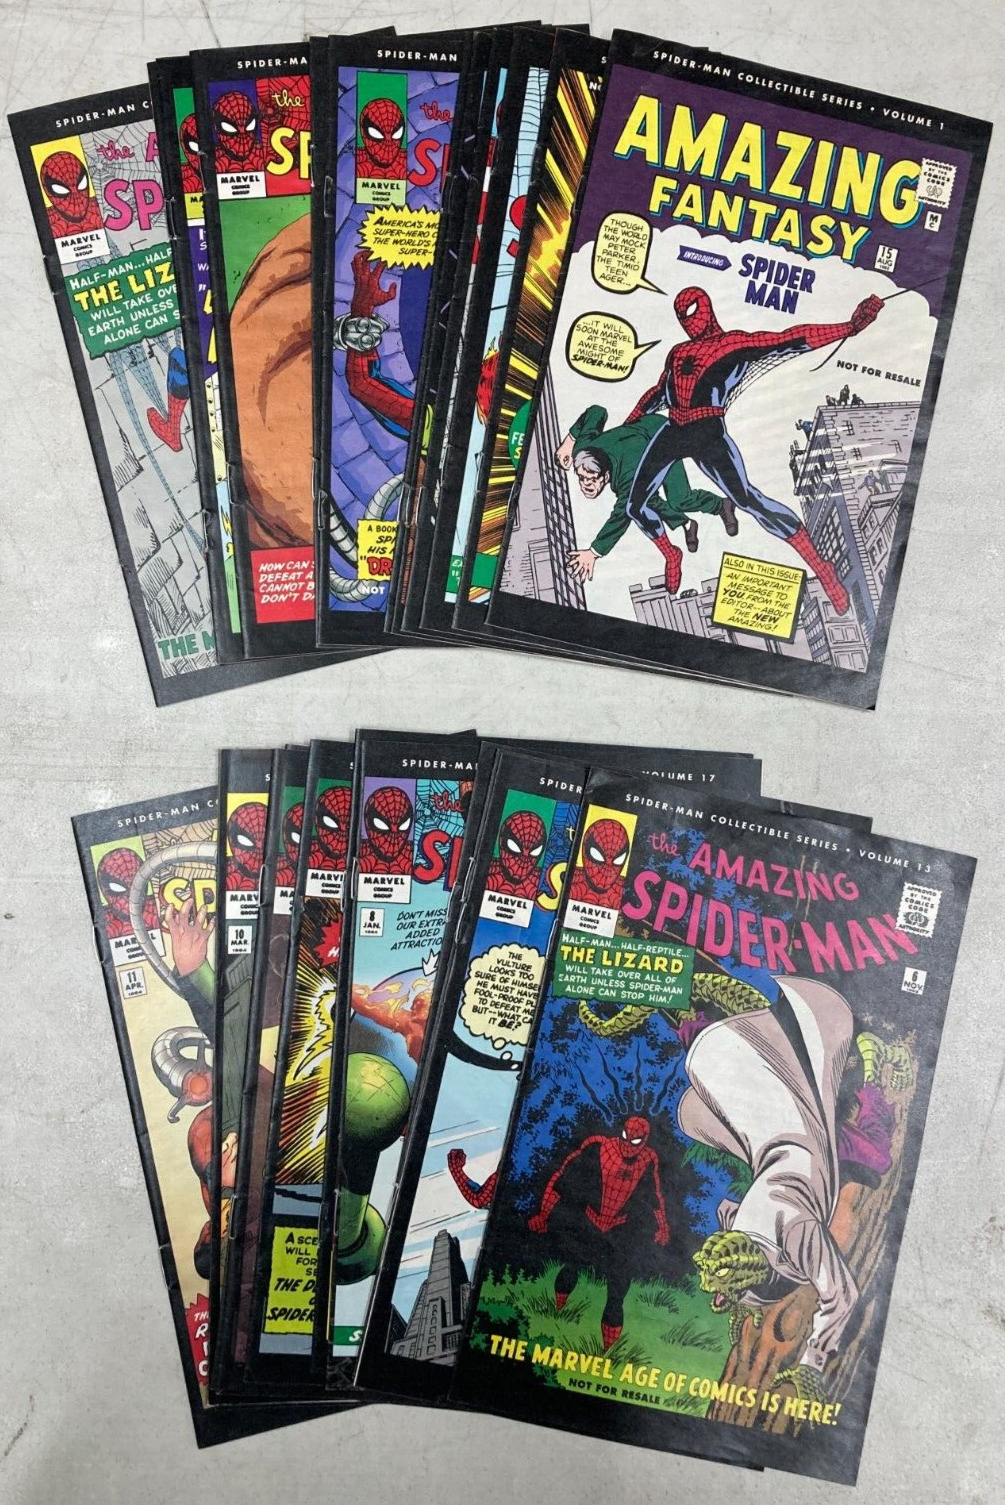 2006 Spiderman Collectible Series Complete Set of 24 Reprint Issues #1-24